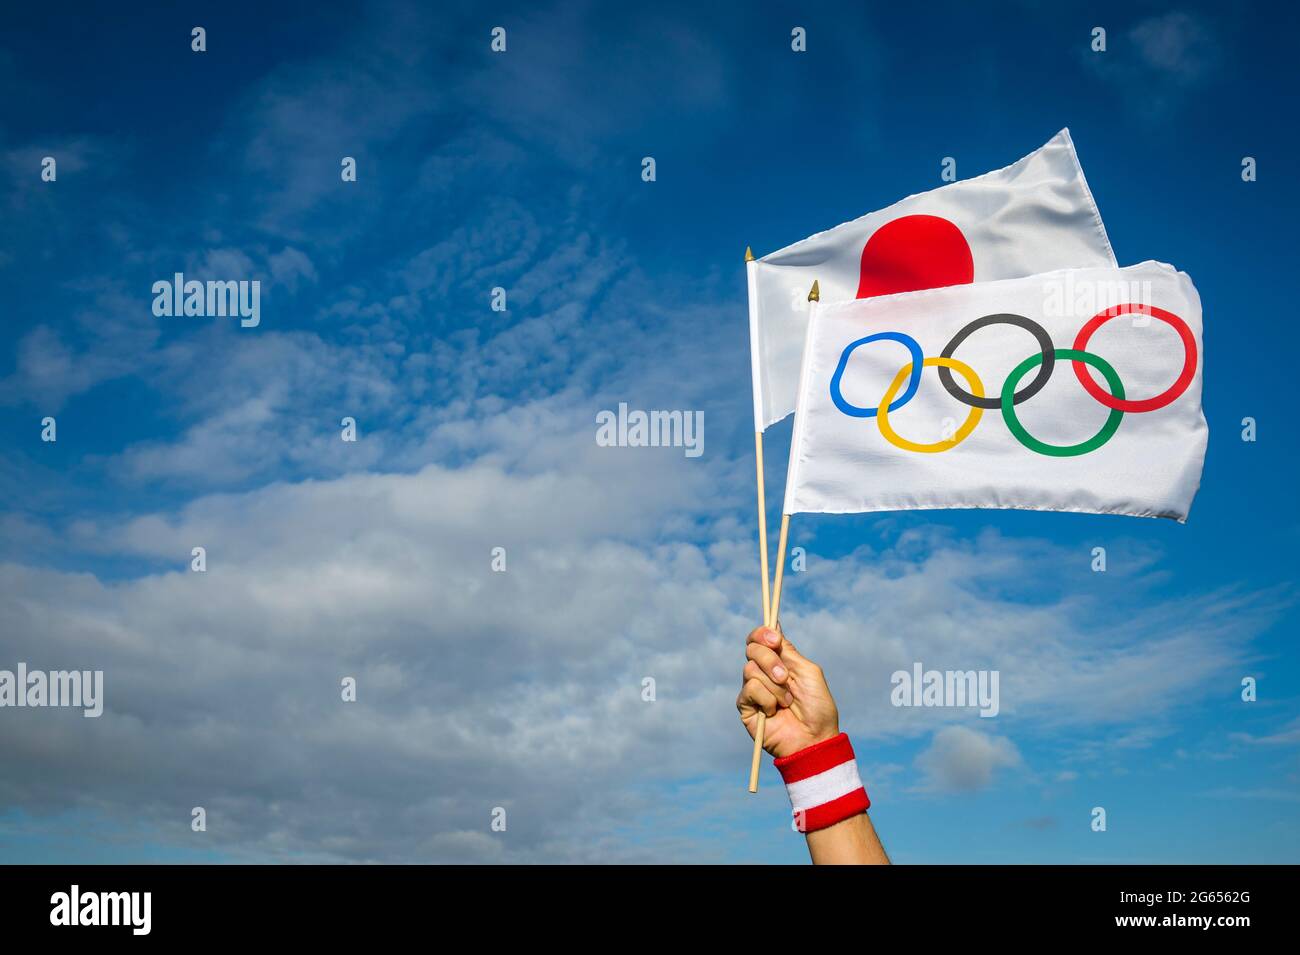 RIO DE JANEIRO - CIRCA MARCH, 2016: An Olympic and Japanese flag held in the hand of an athlete wearing a red and white wristband flutter together in Stock Photo